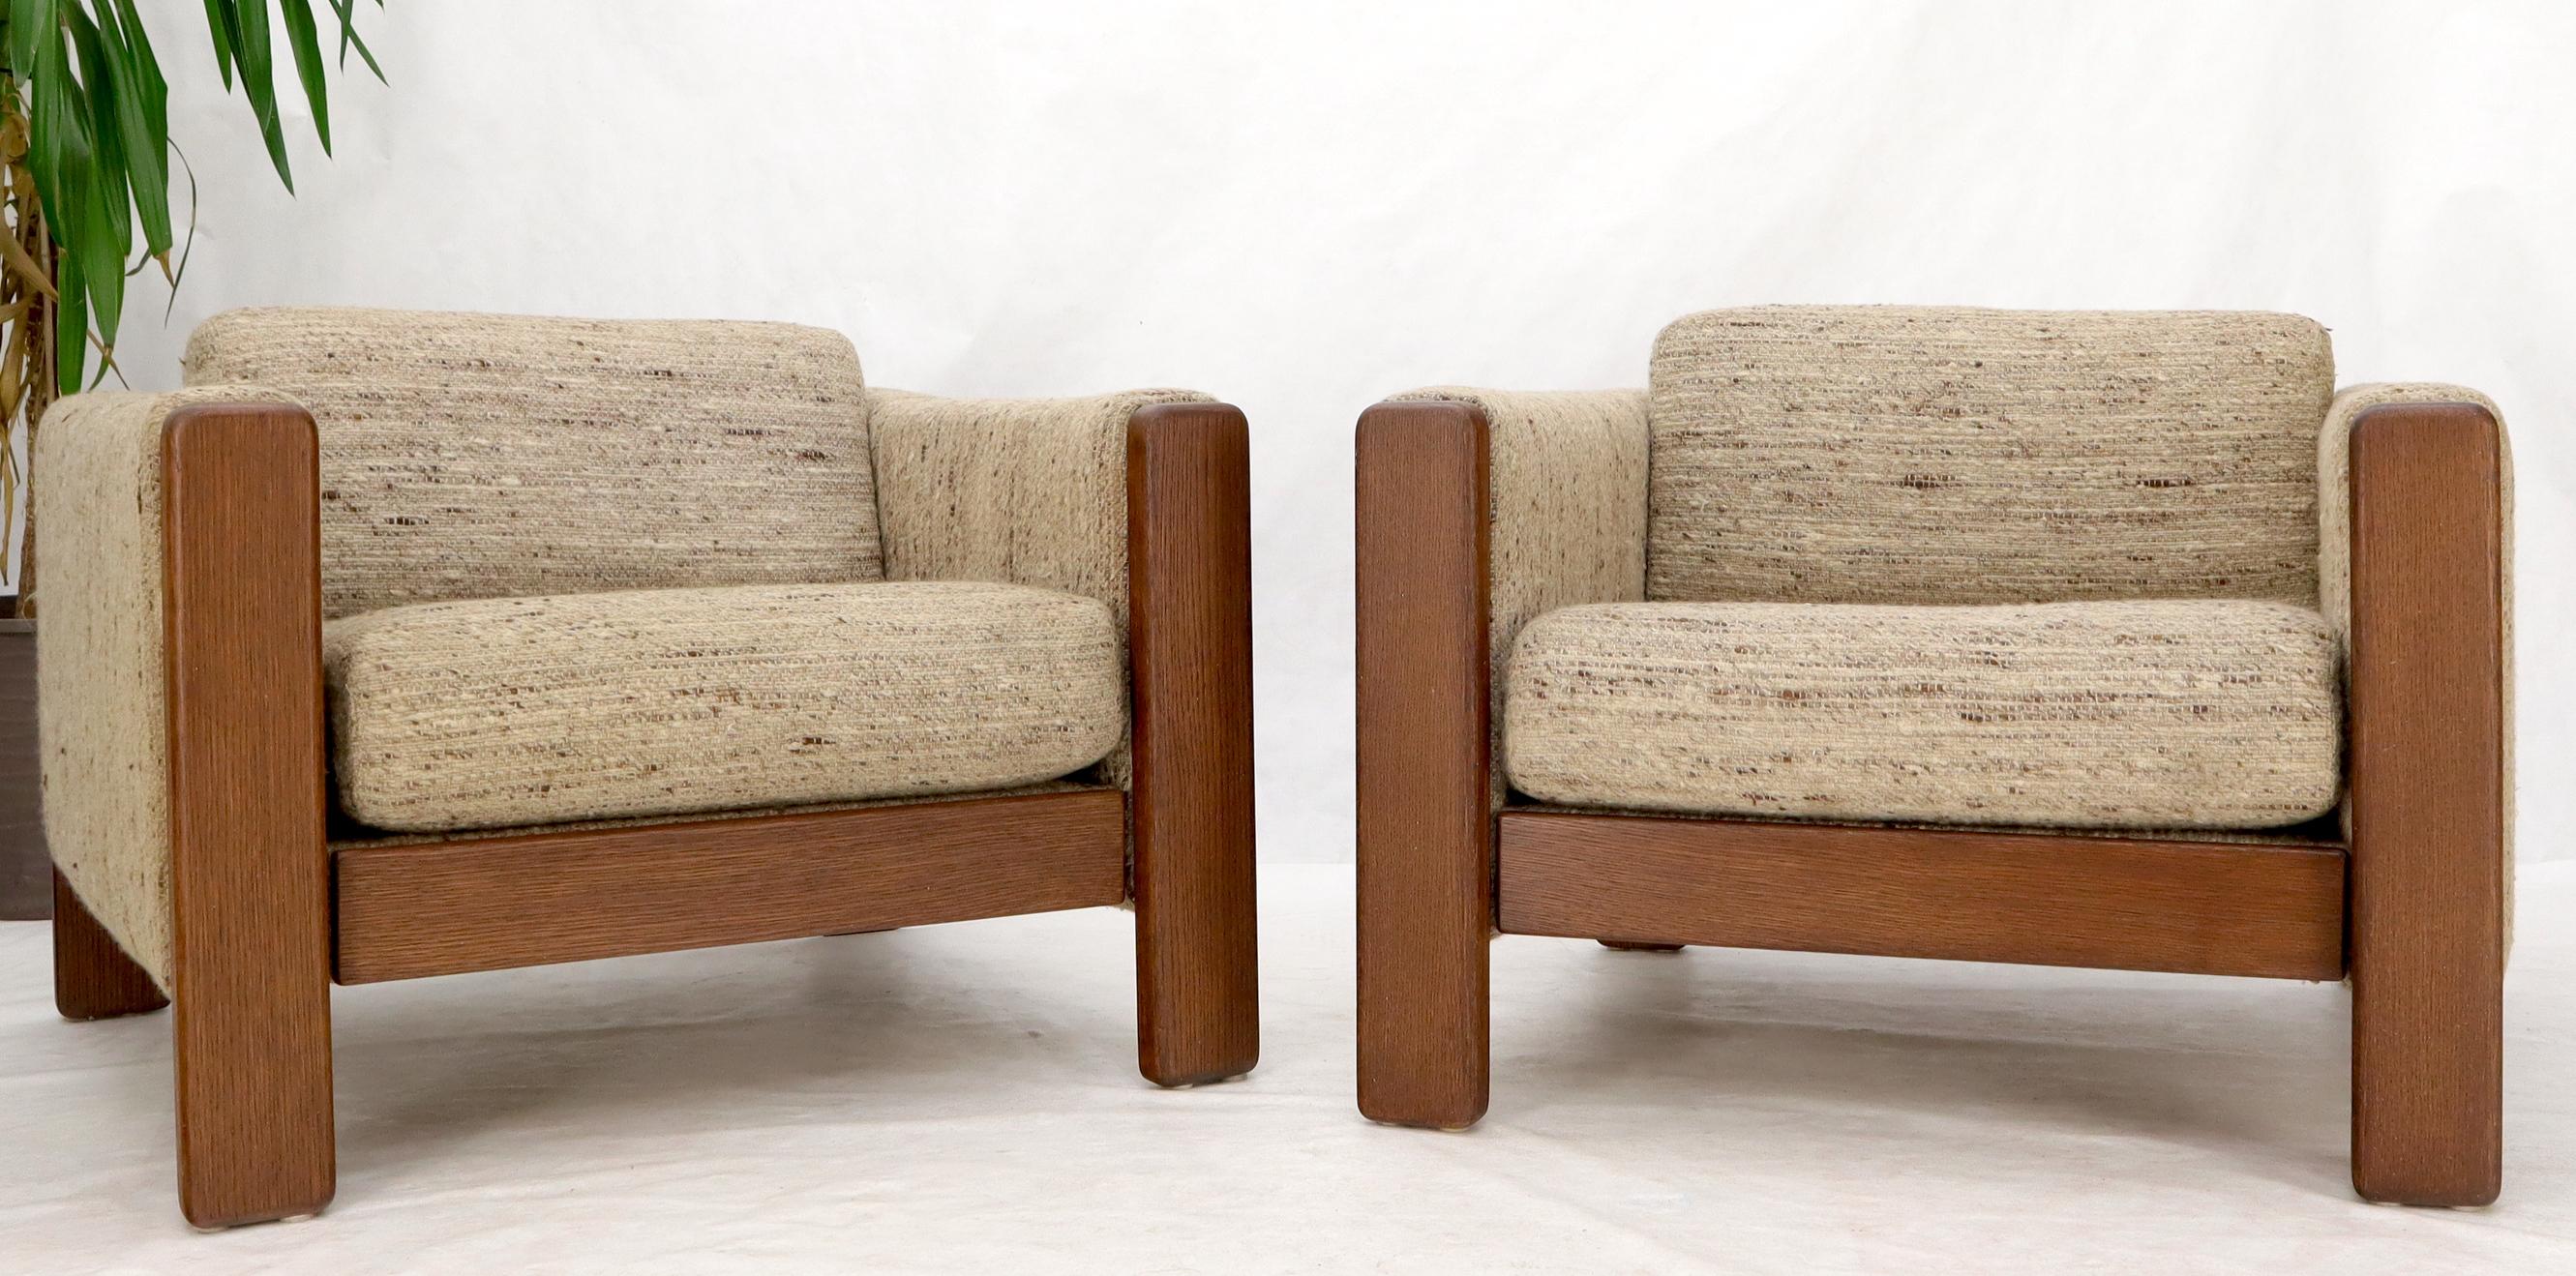 American Pair of Knoll Wool Upholstery Cube Shape Lounge Club Chairs Teak Arms